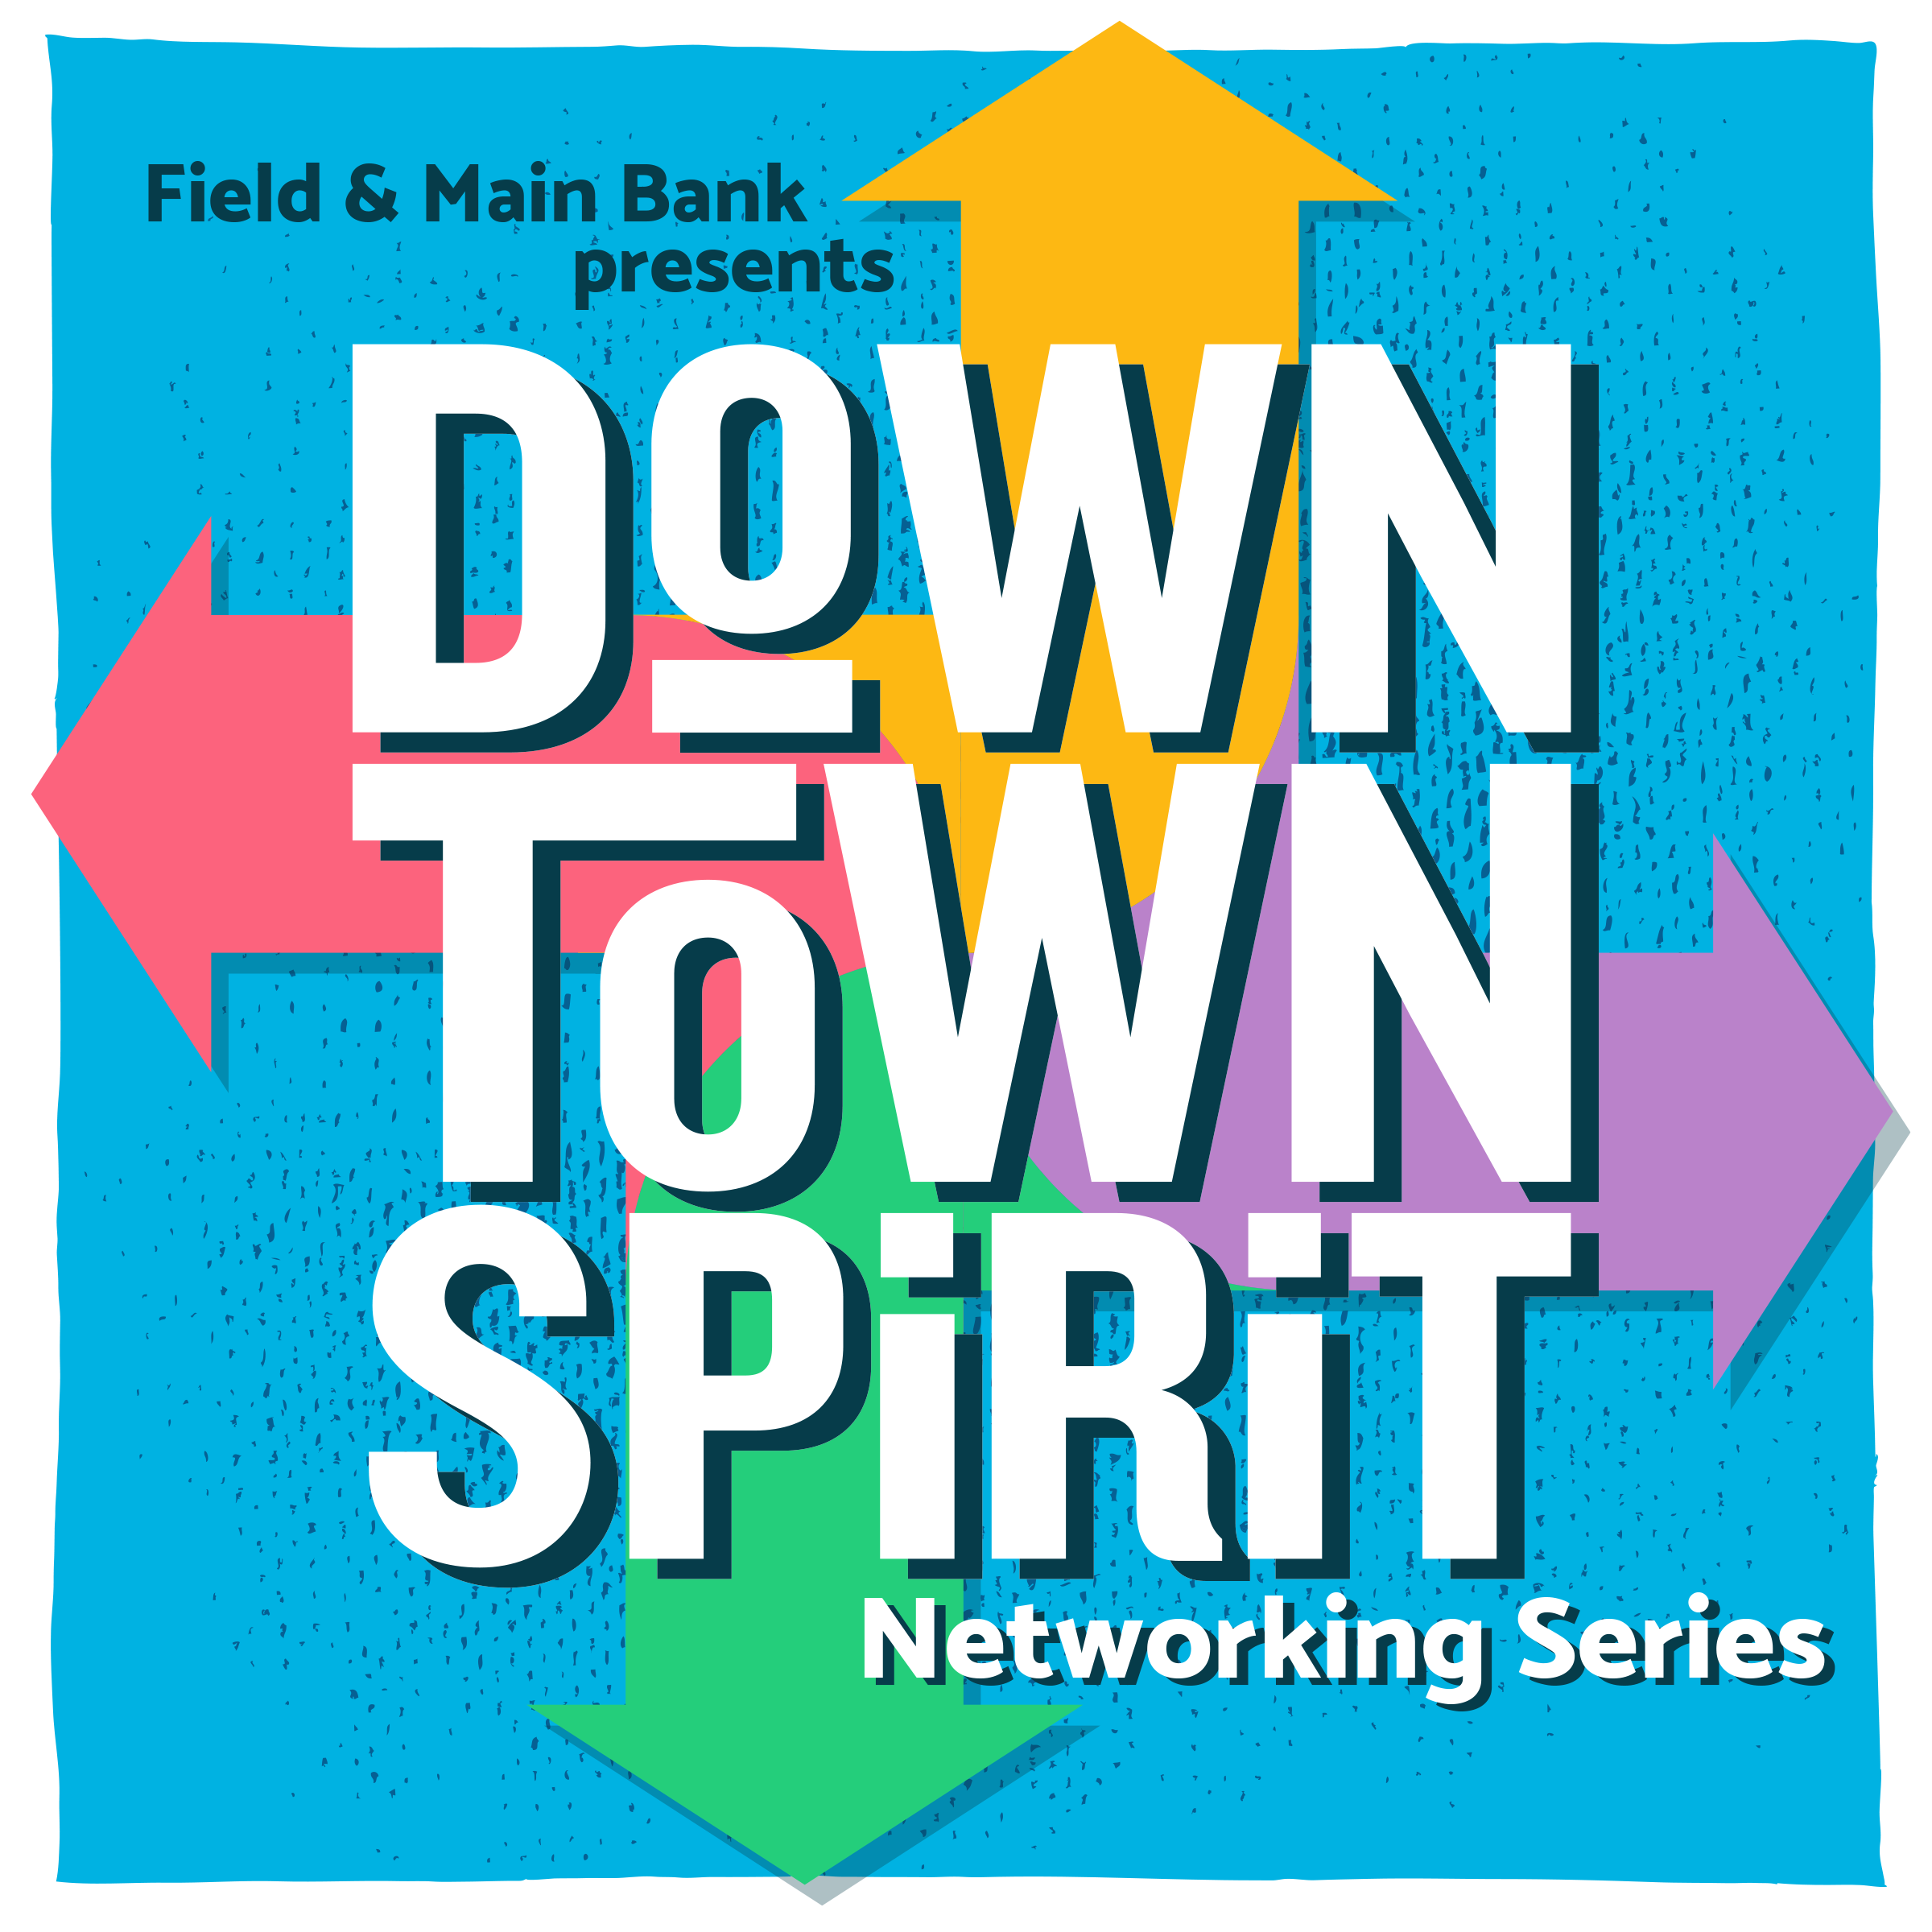 Downtown Spirit Networking Series Presented by Field & Main Bank